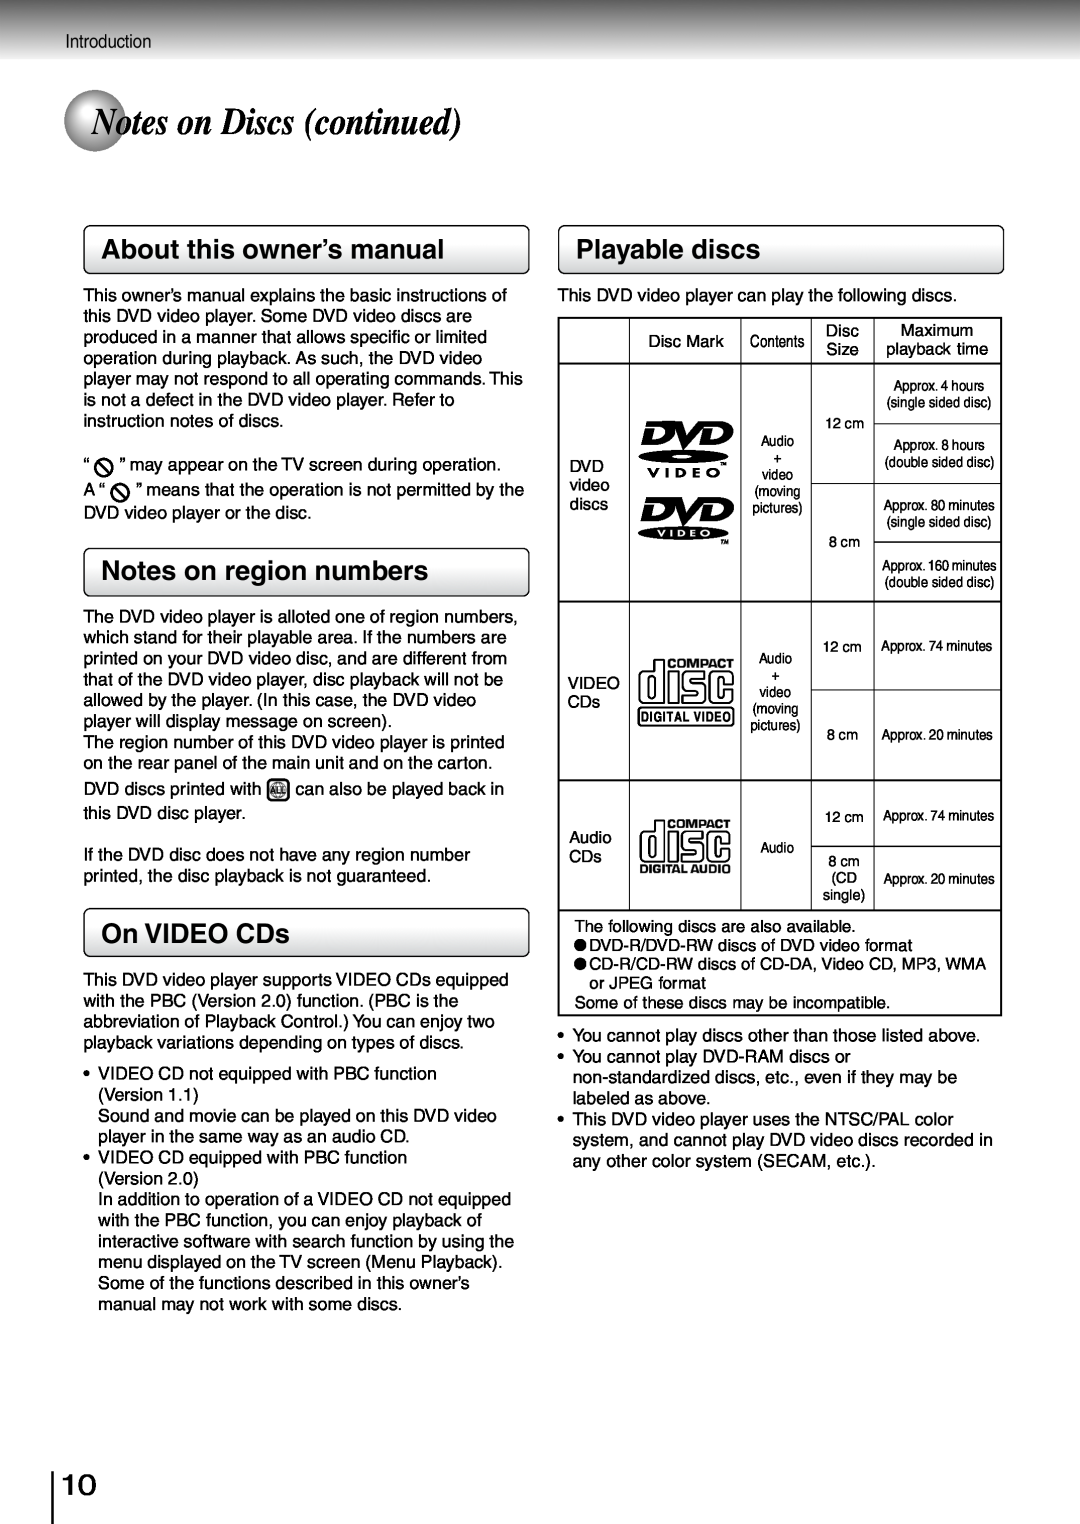 Toshiba SD-260SY, SD-260SV Notes on Discs continued, About this owner’s manual, Notes on region numbers, On VIDEO CDs 